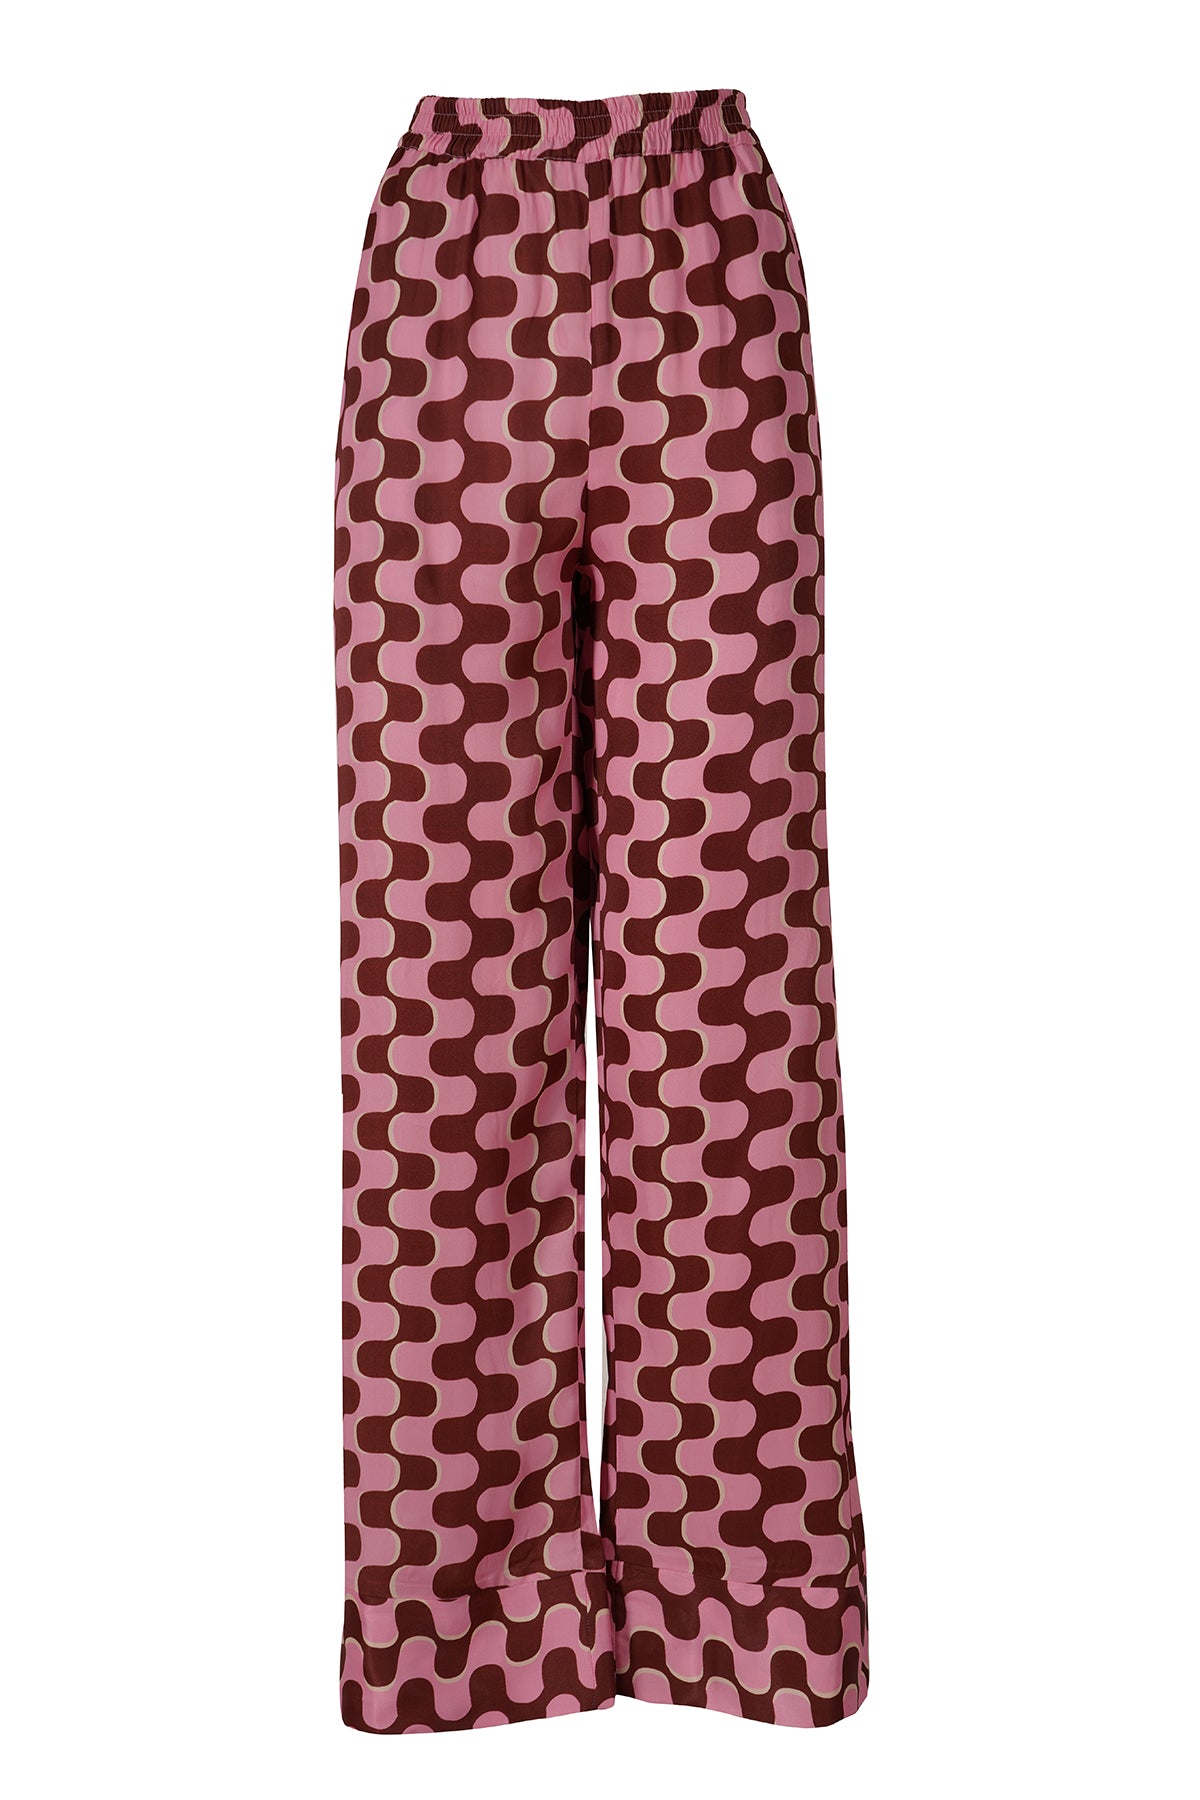 KENZA TROUSERS - PINK WAVES